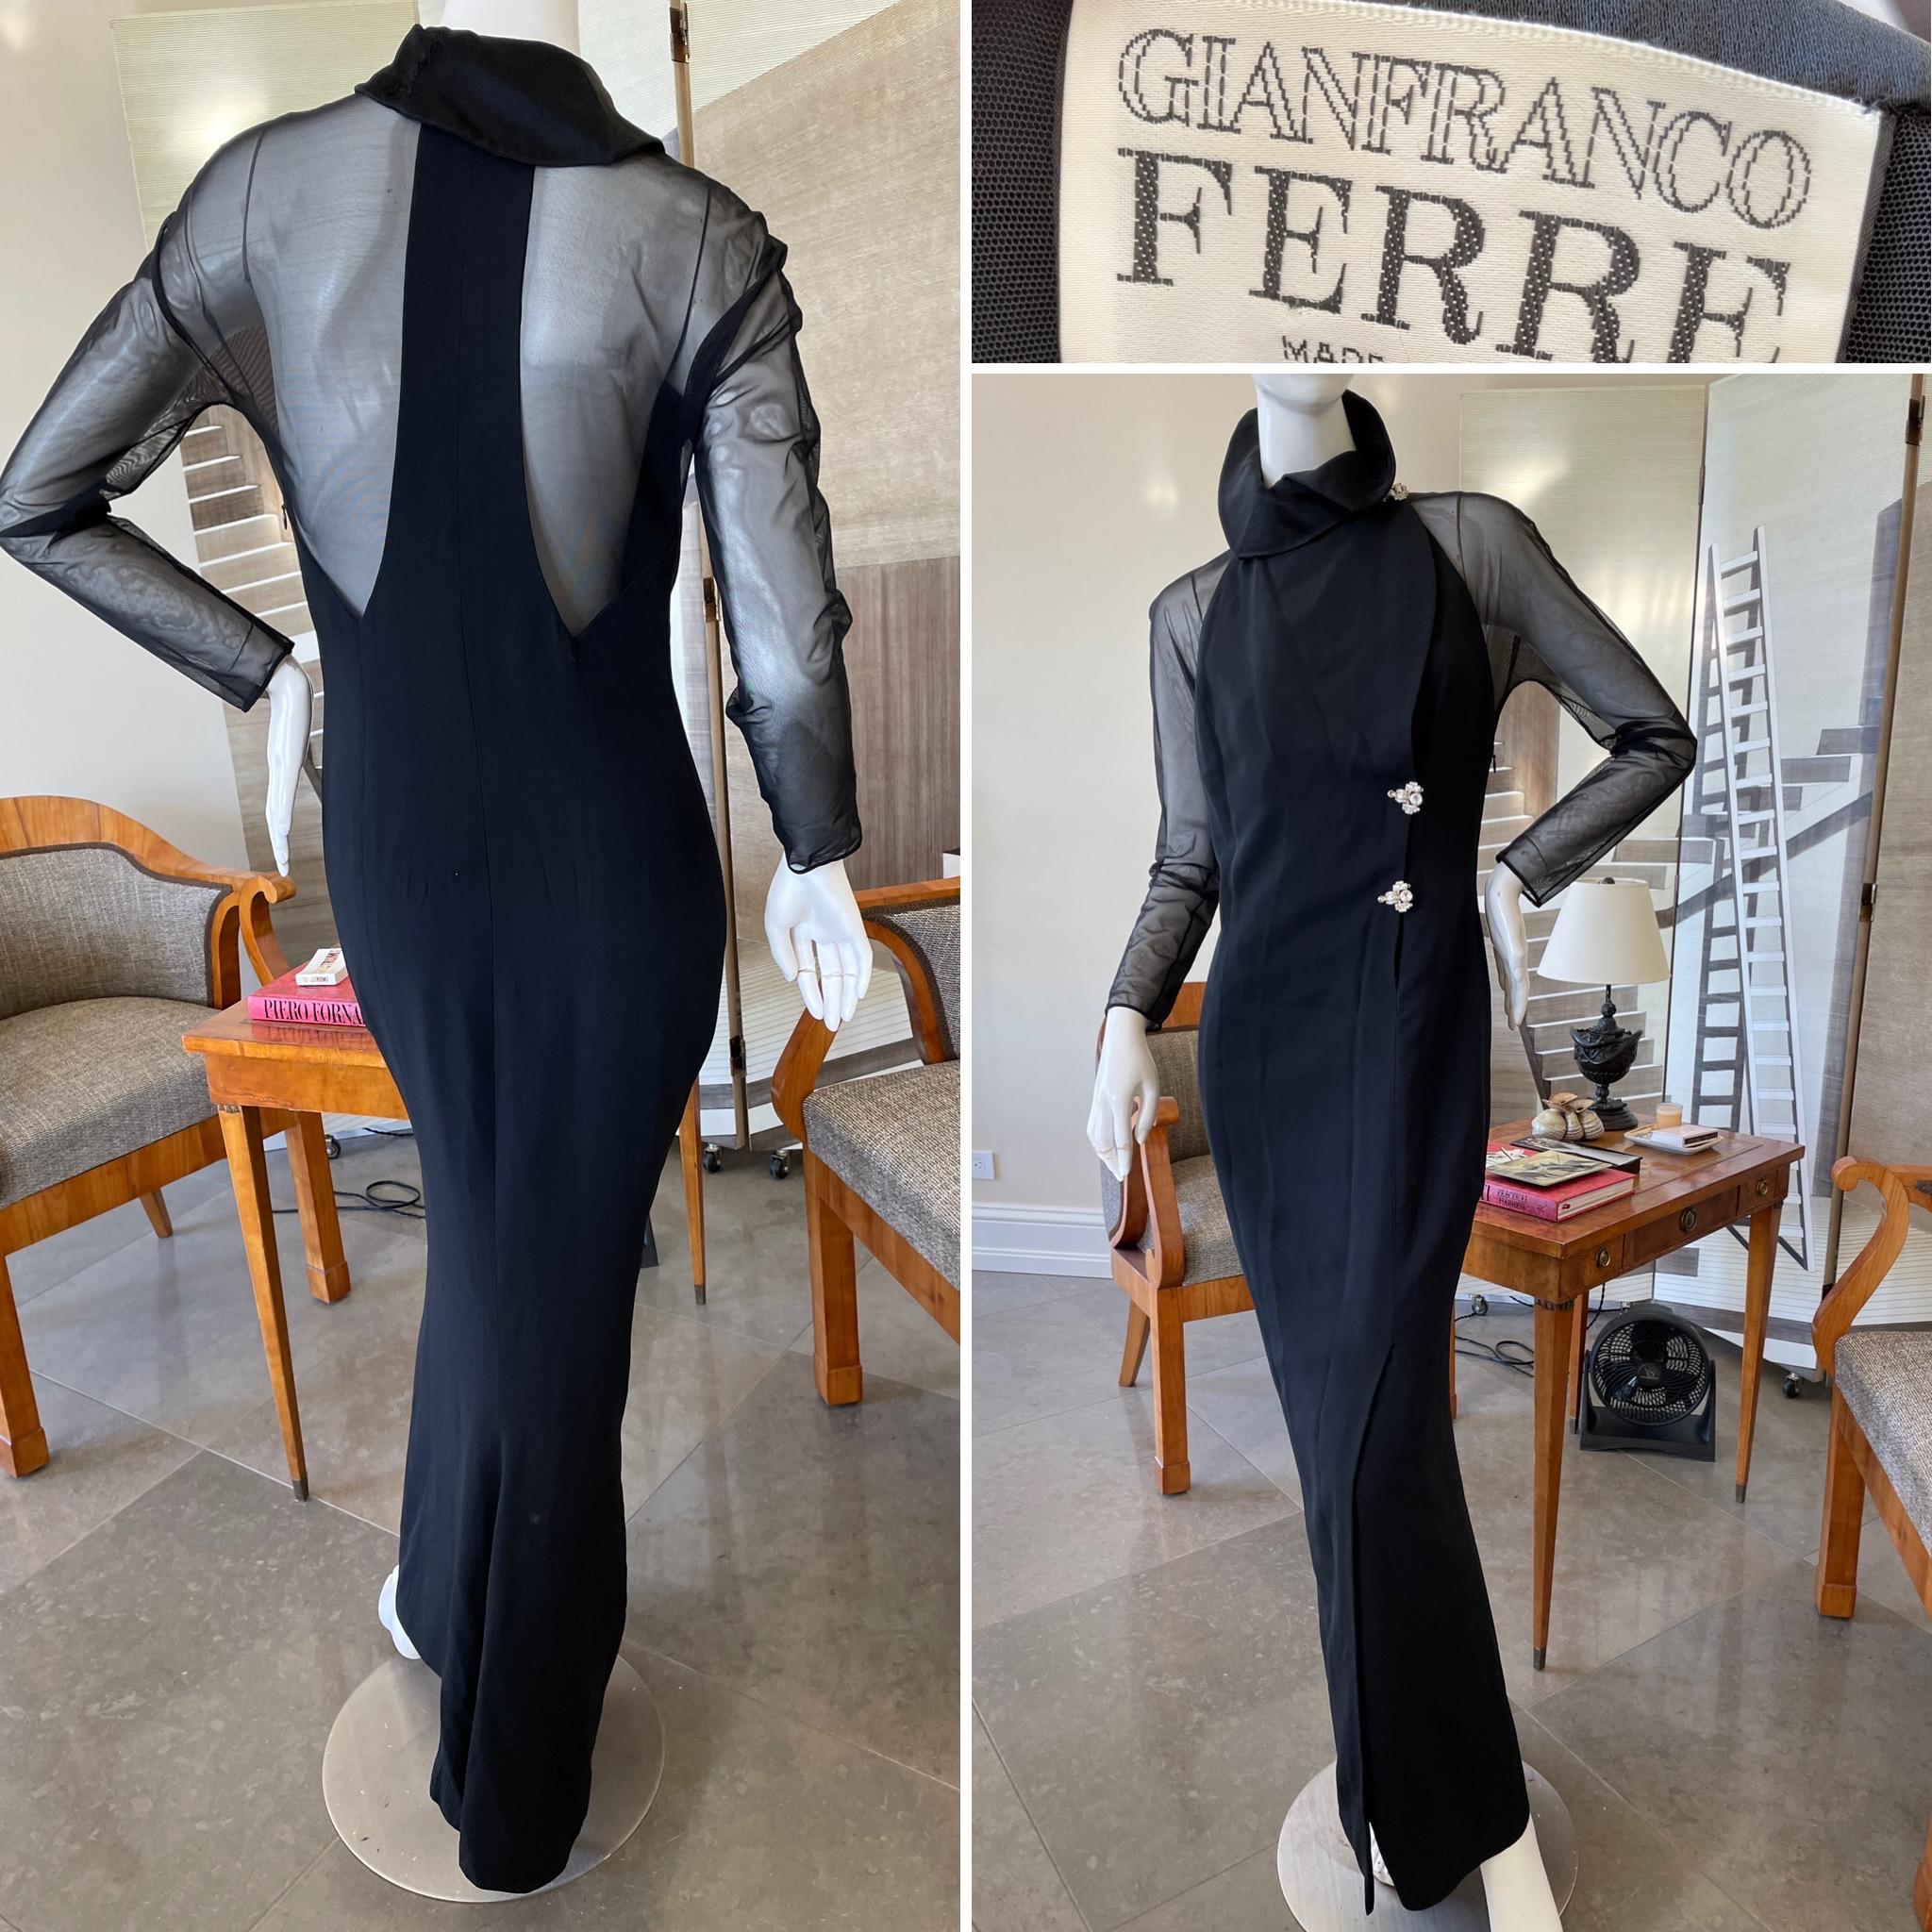 Women's  Gianfranco Ferre Vintage Sheer Black Evening Dress with Sexy Back For Sale